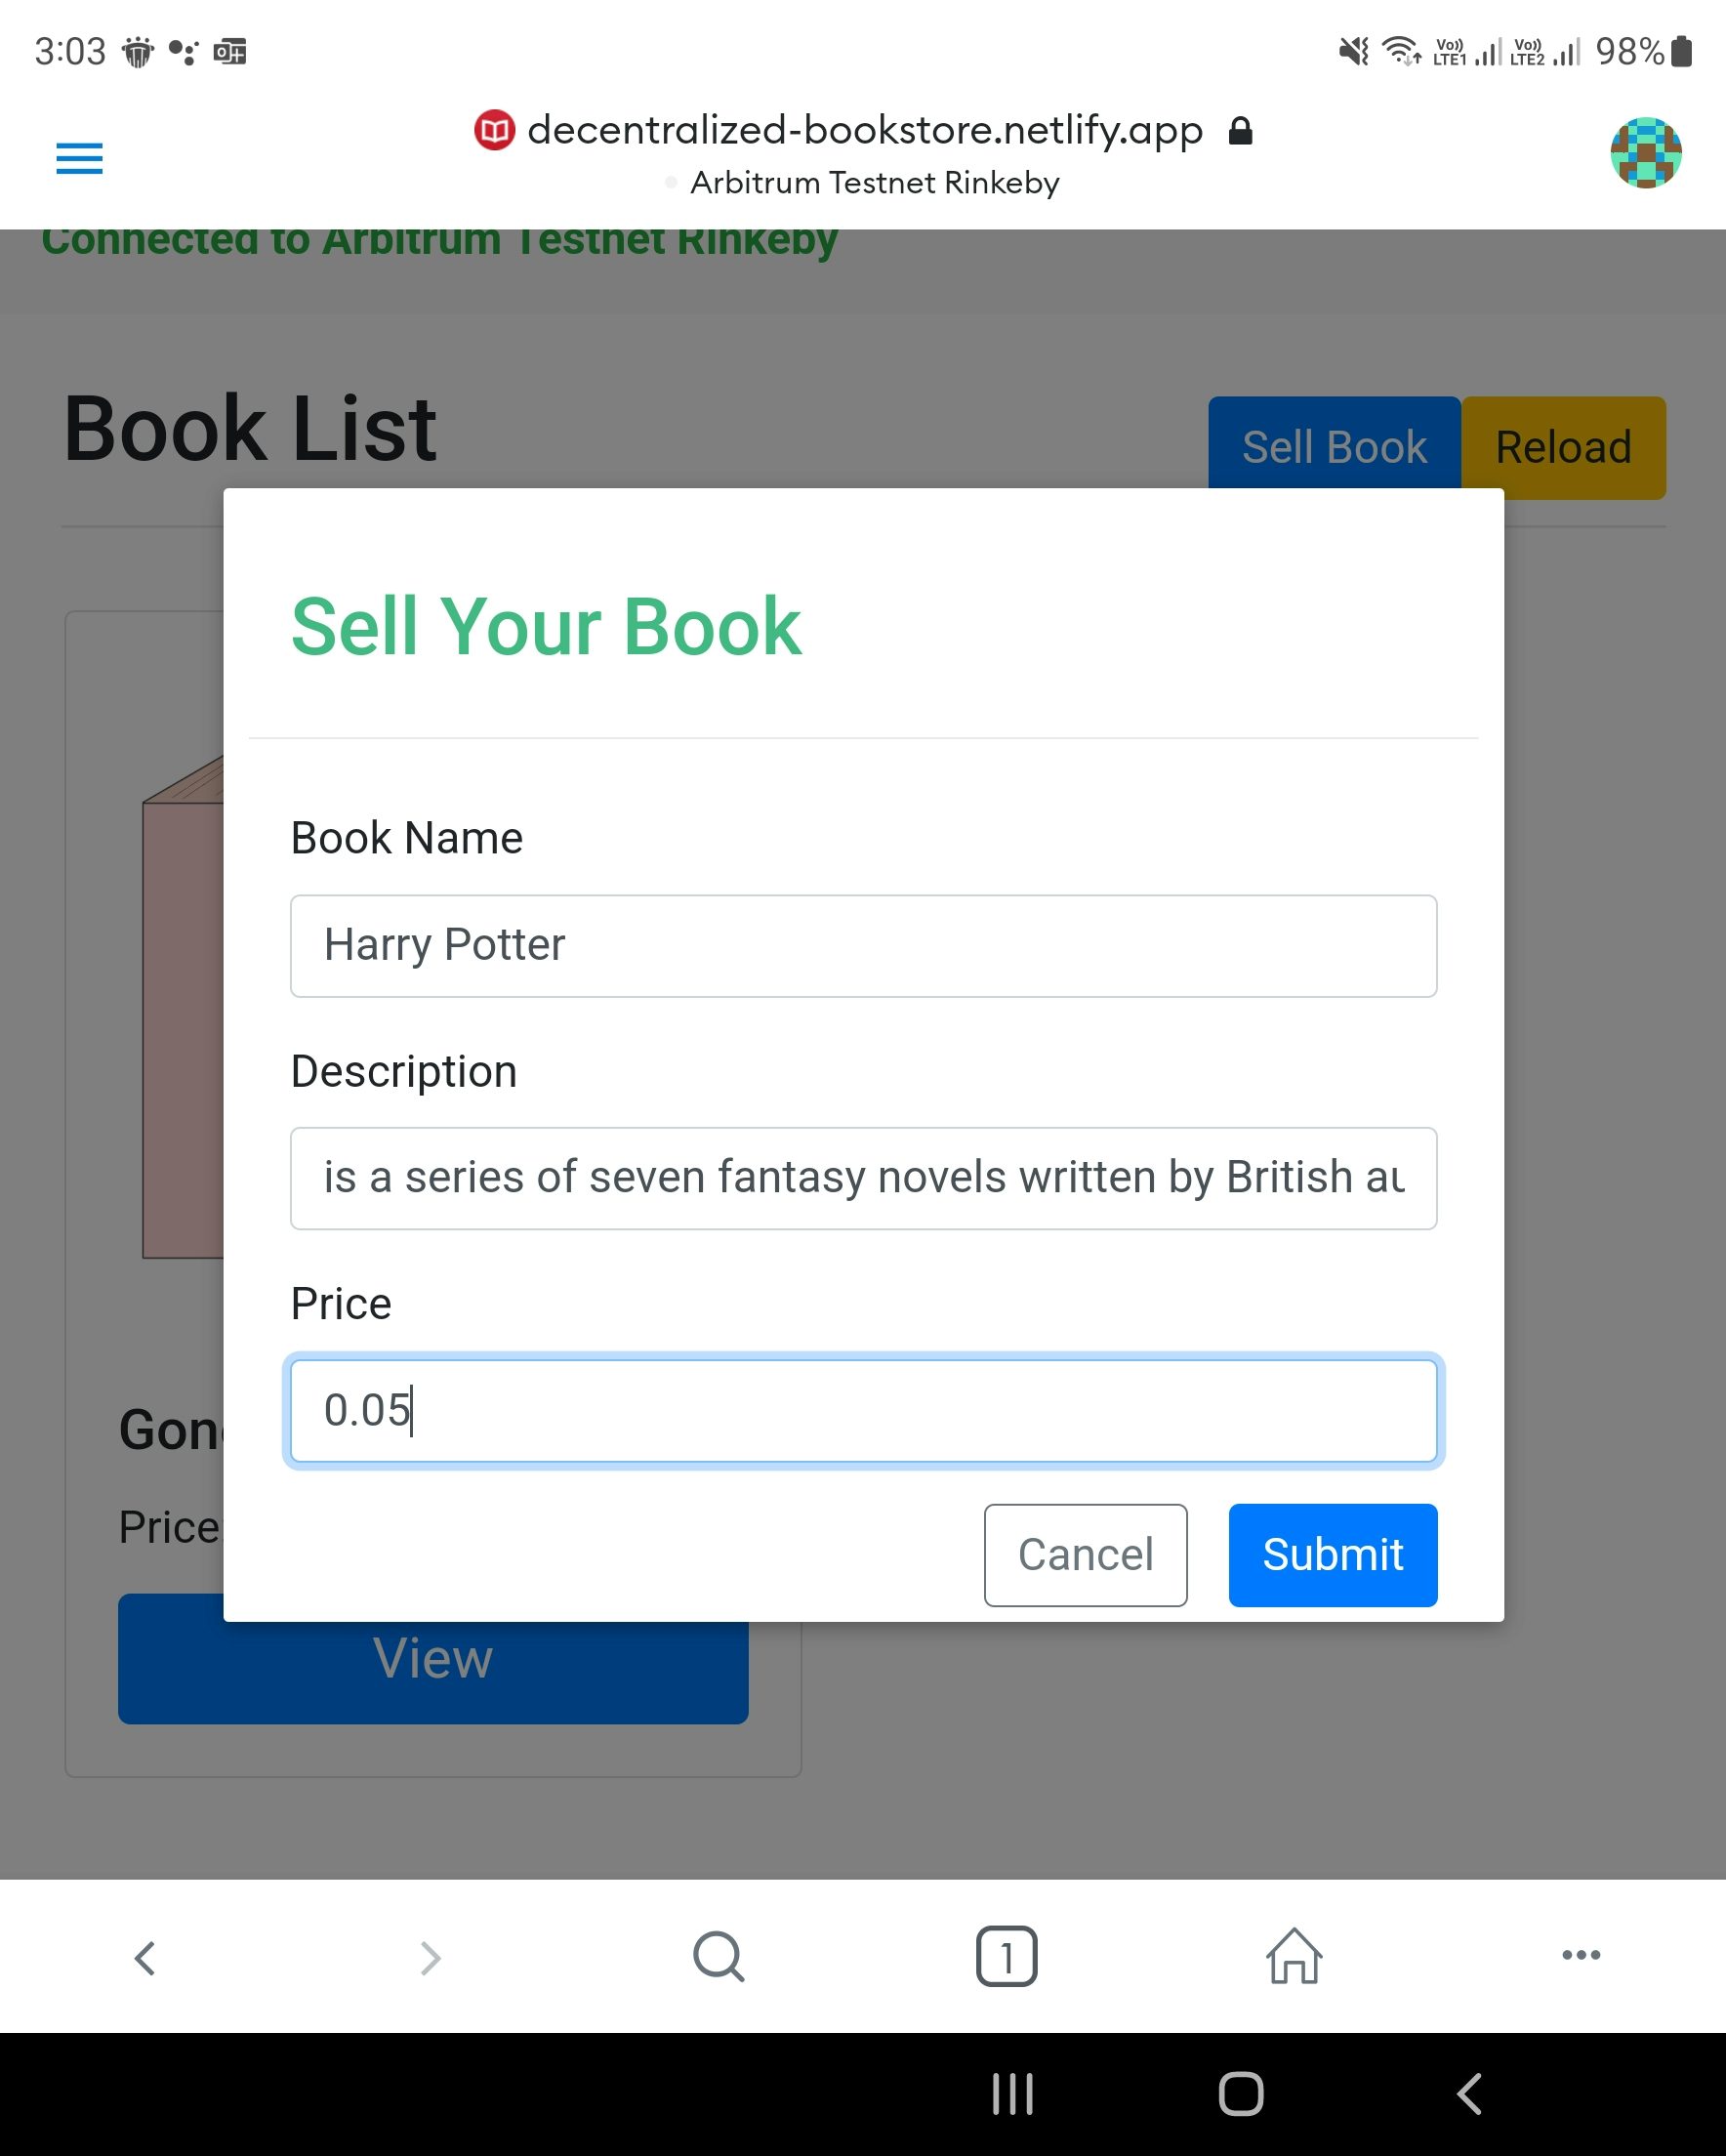 Sell Book - 1 of 4